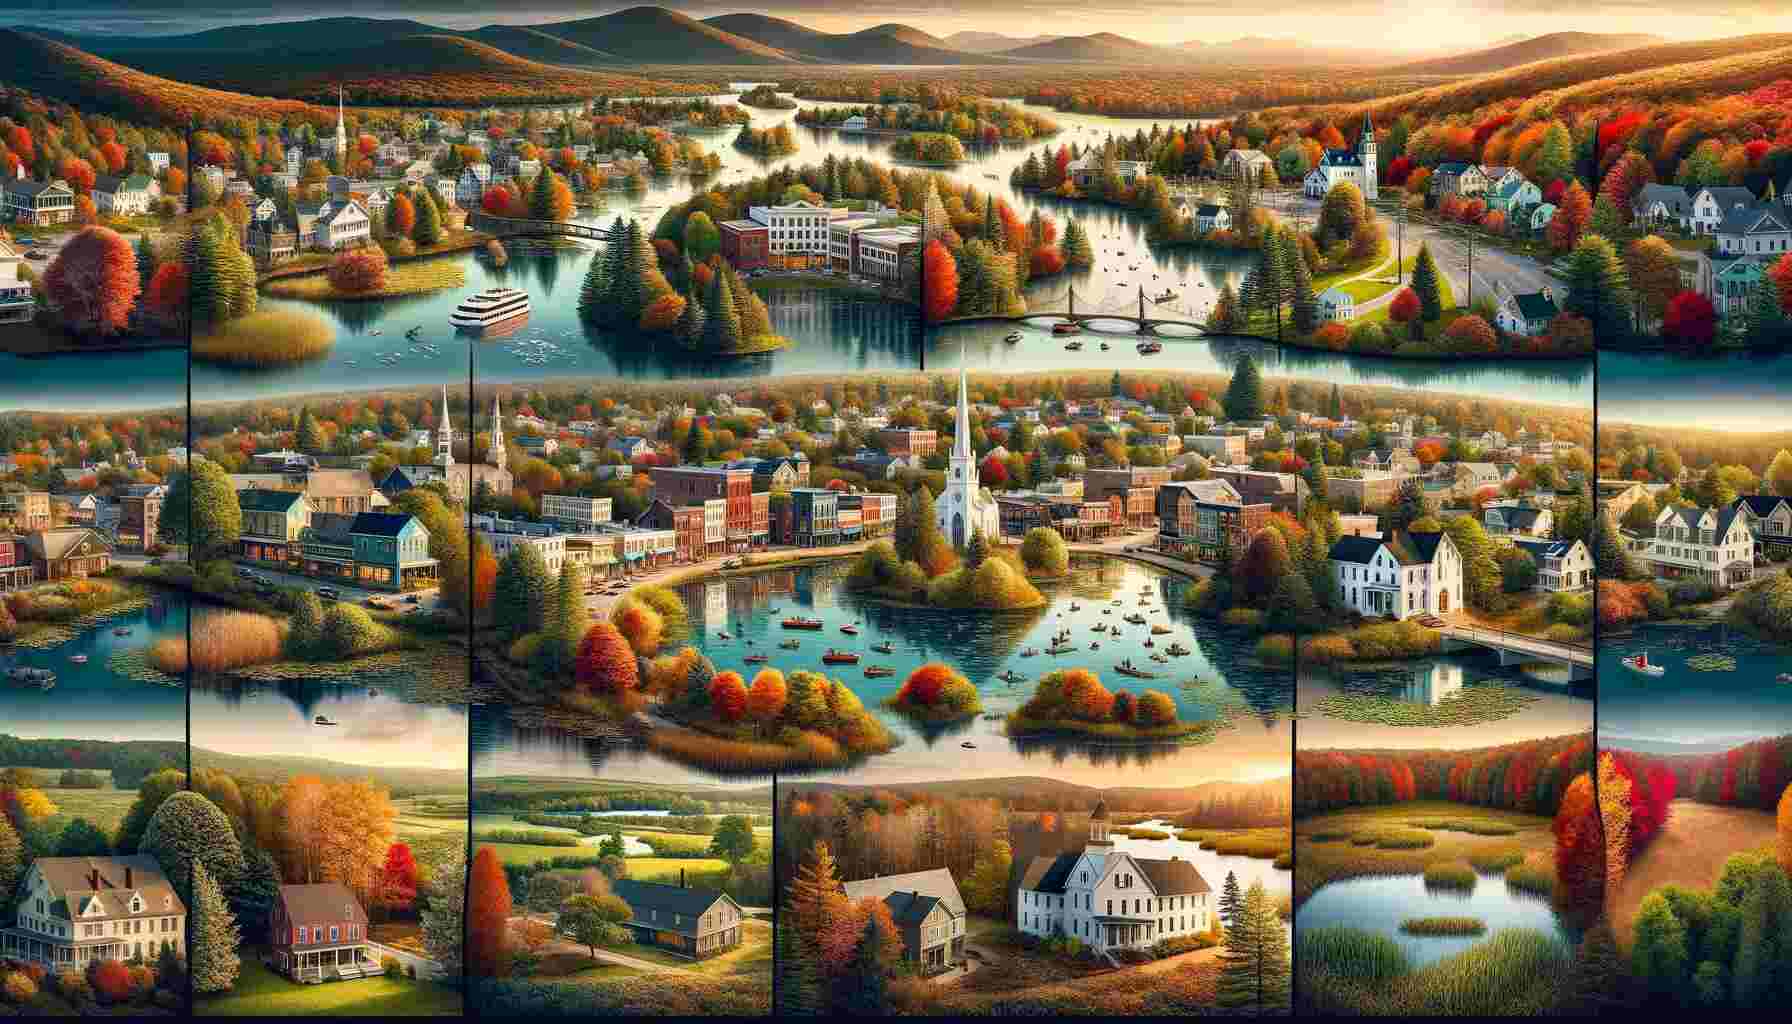 Here is an image for "24 Best Small Towns in New Jersey for Outdoor Enthusiasts," showcasing a panoramic collage of various landscapes and town scenes. Each segment represents the unique charm and outdoor beauty of New Jersey's small towns.